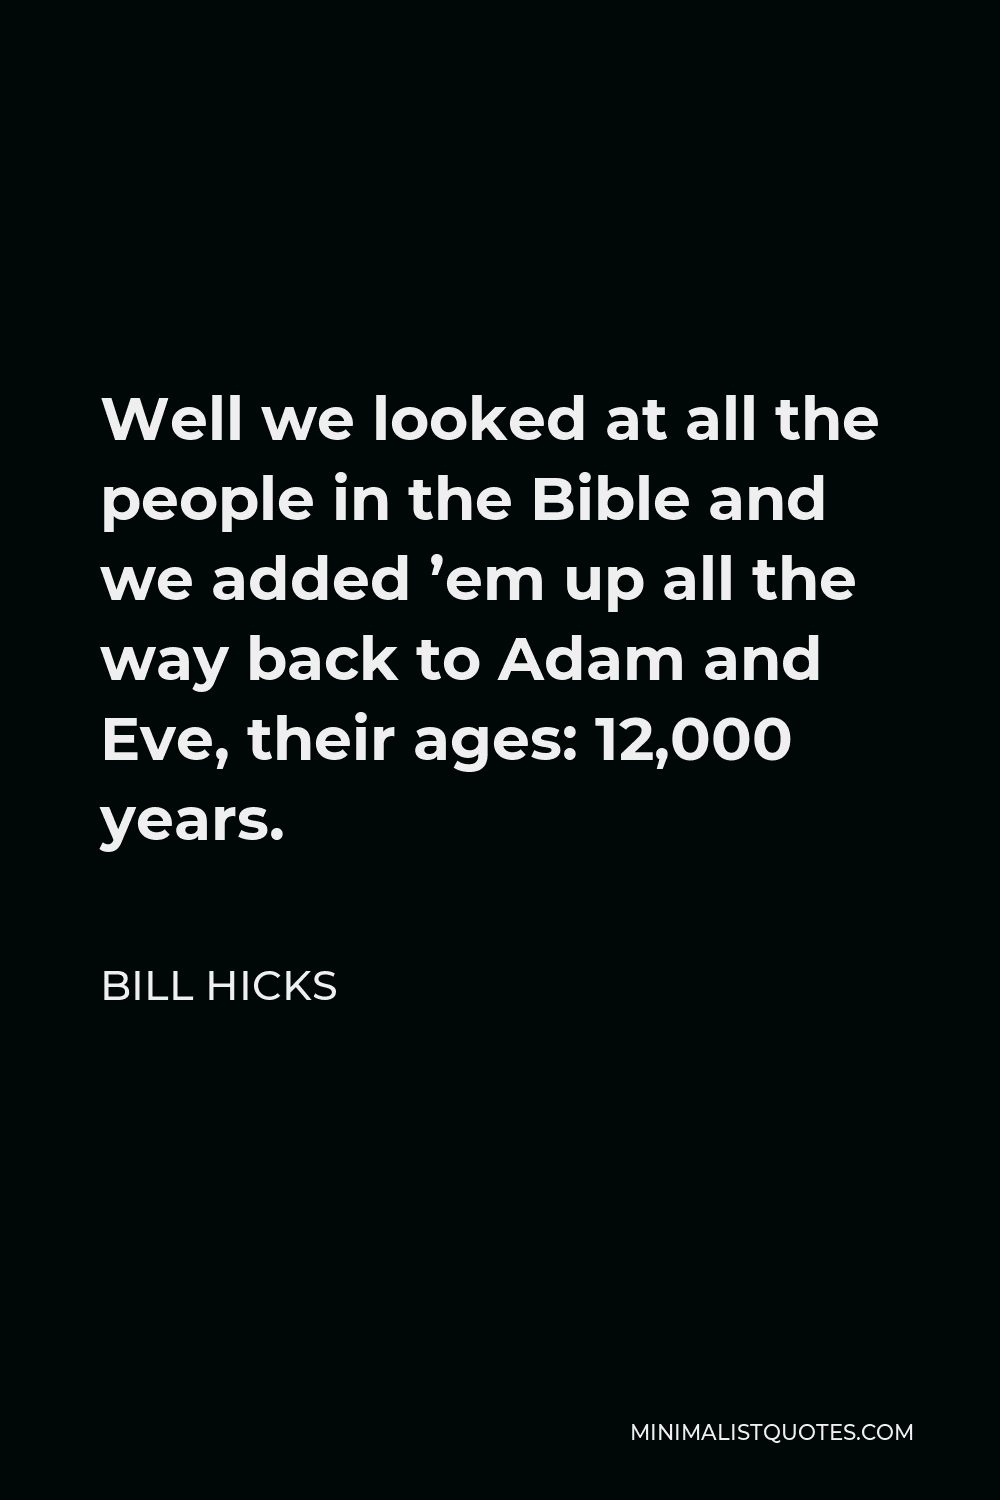 Bill Hicks Quote - Well we looked at all the people in the Bible and we added ’em up all the way back to Adam and Eve, their ages: 12,000 years.